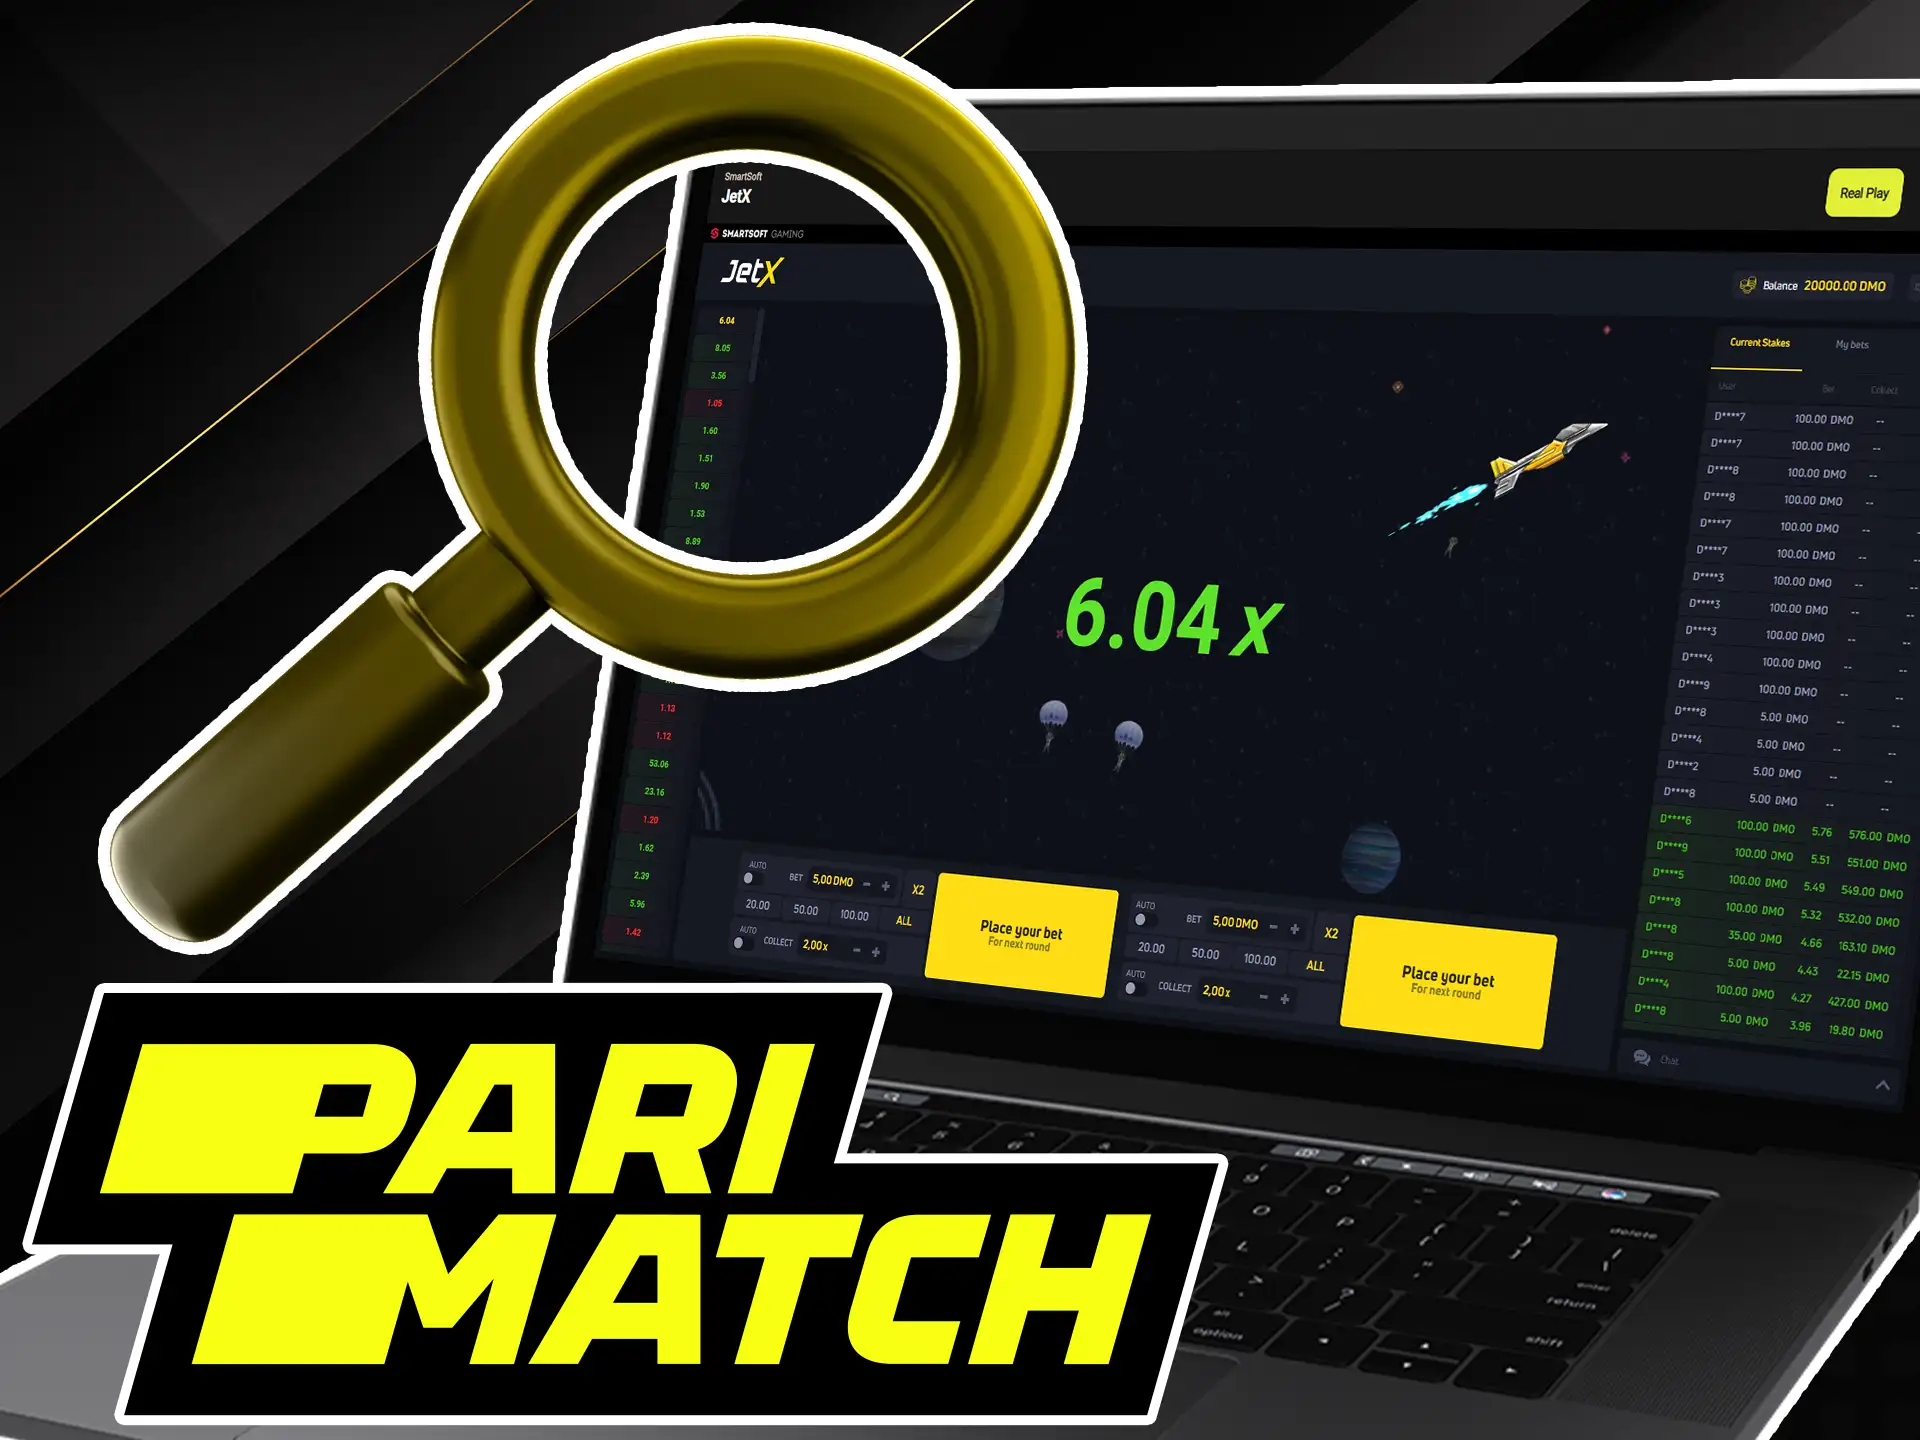 Play for free and get comfortable with the game before you wager real money at Parimatch.